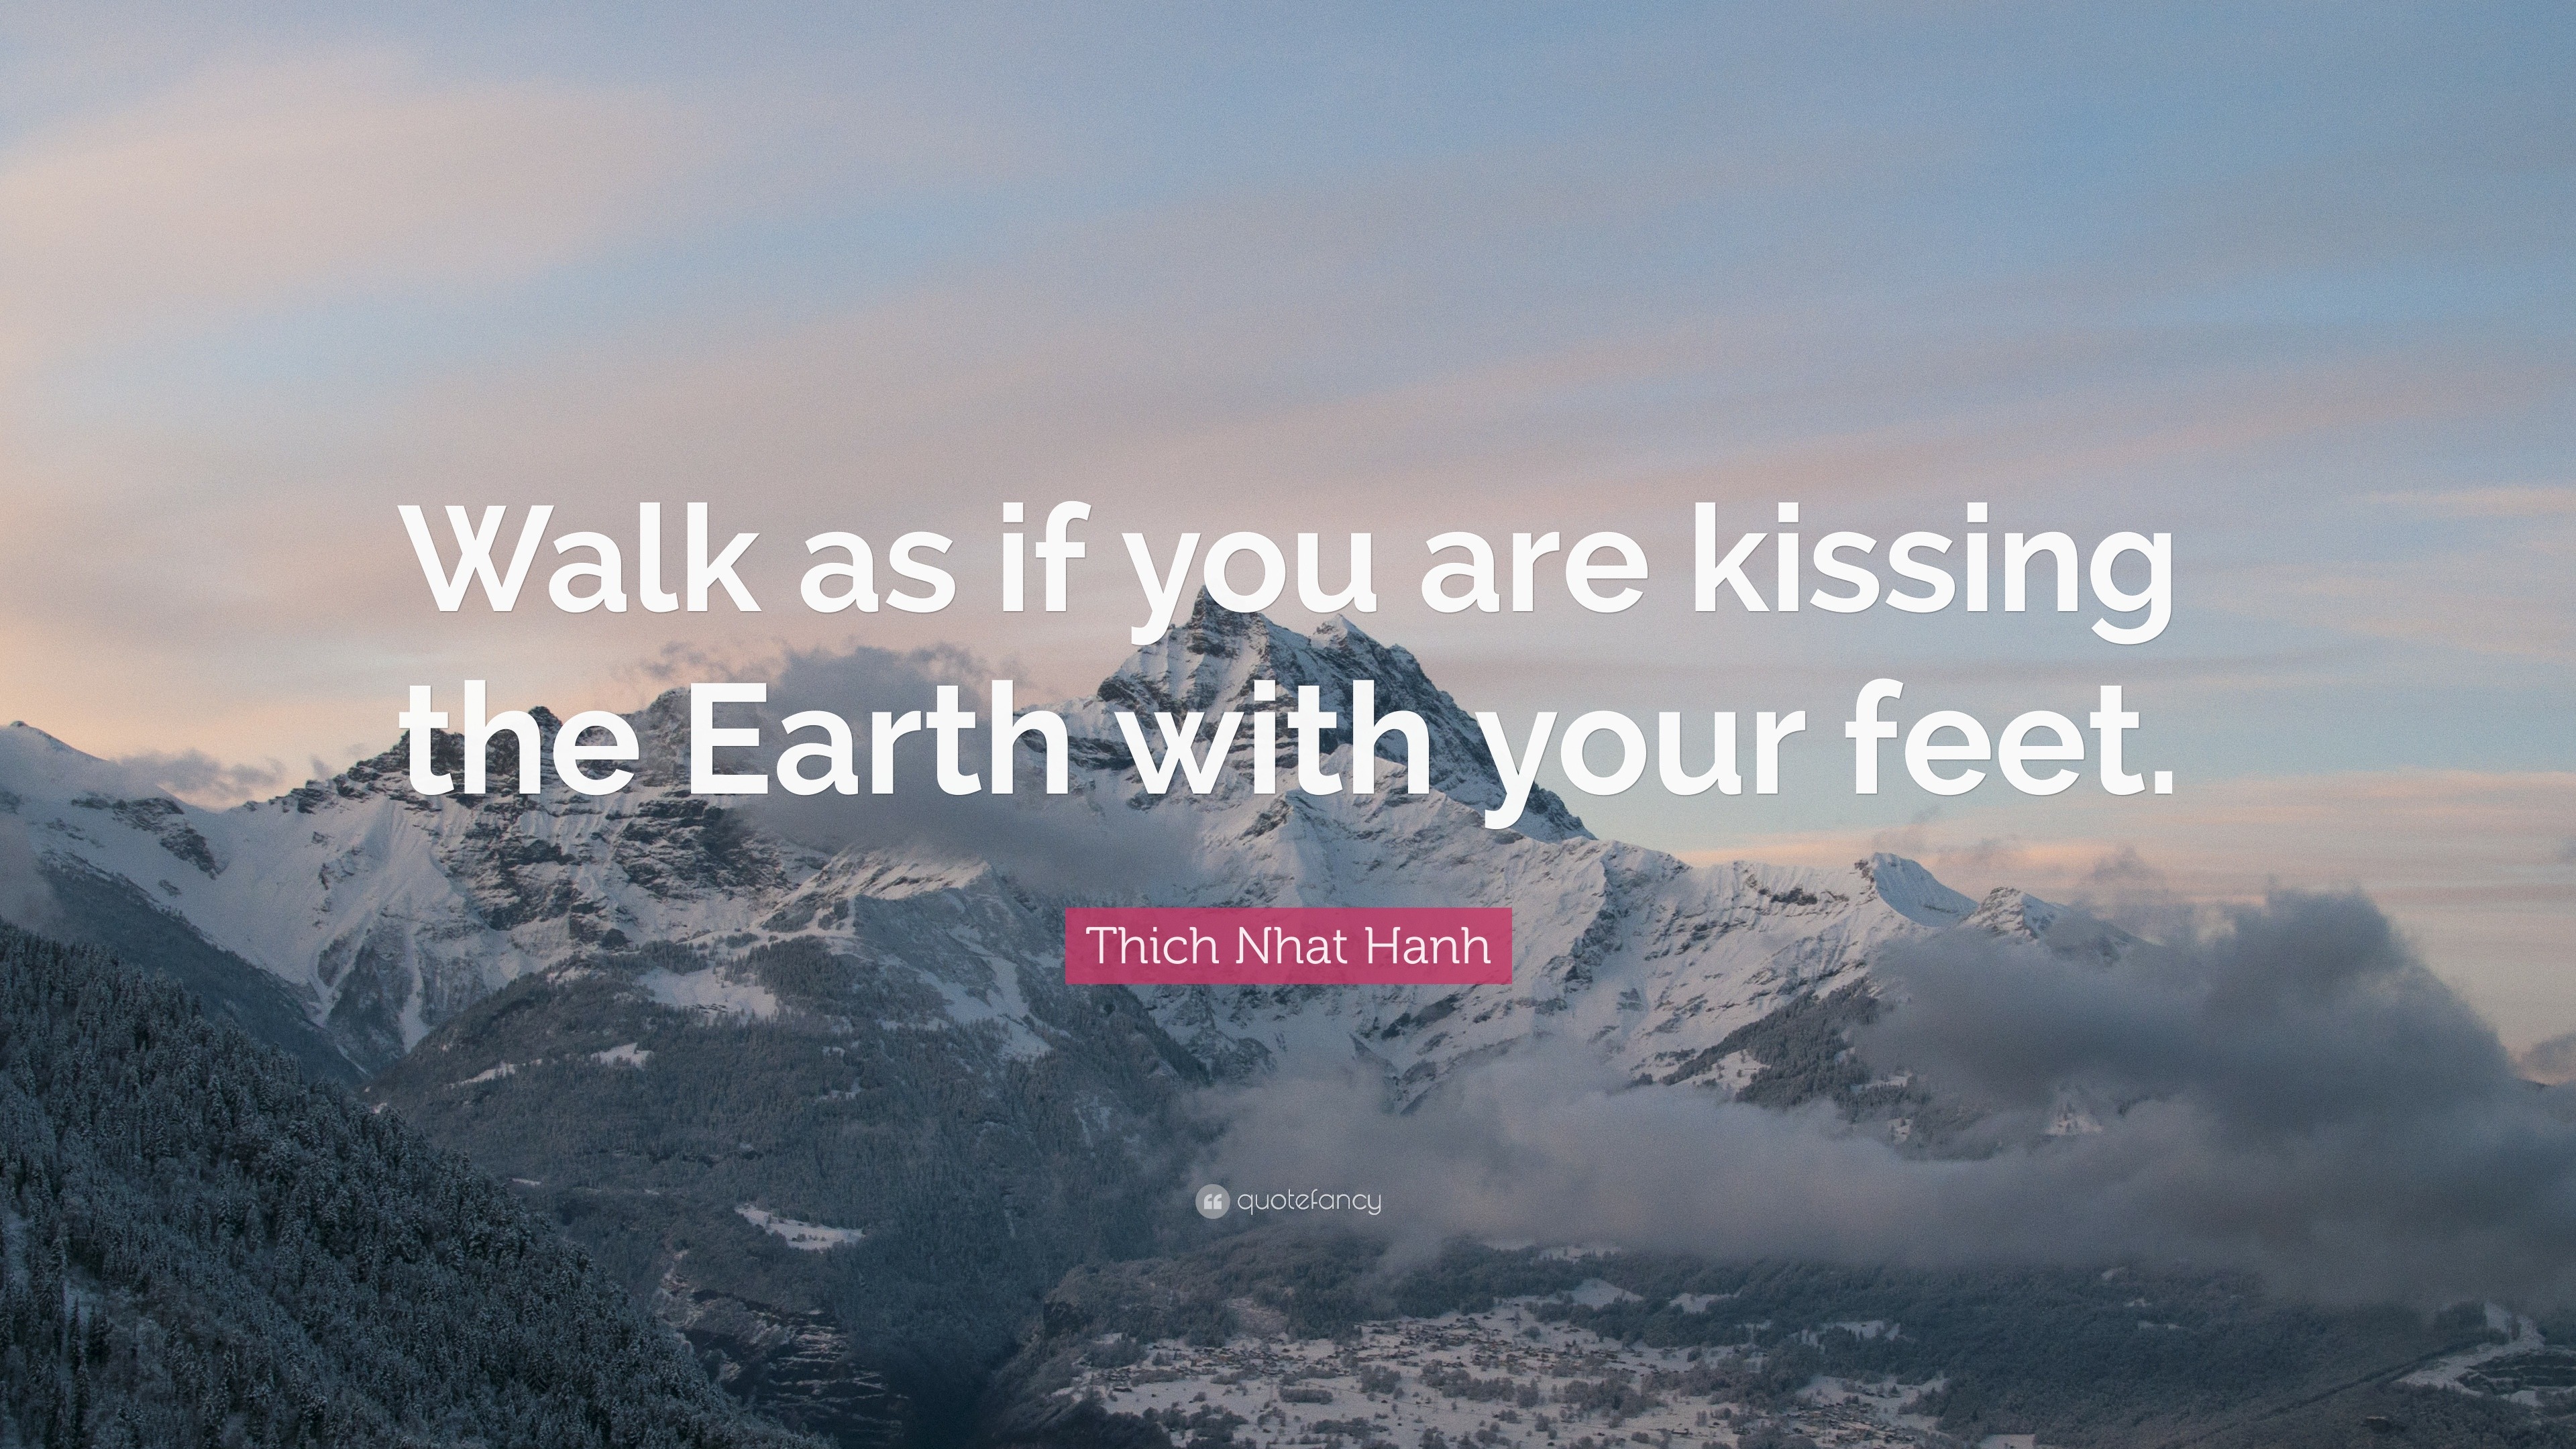 Thich Nhat Hanh Quote: “Walk as if you are kissing the Earth with your ...